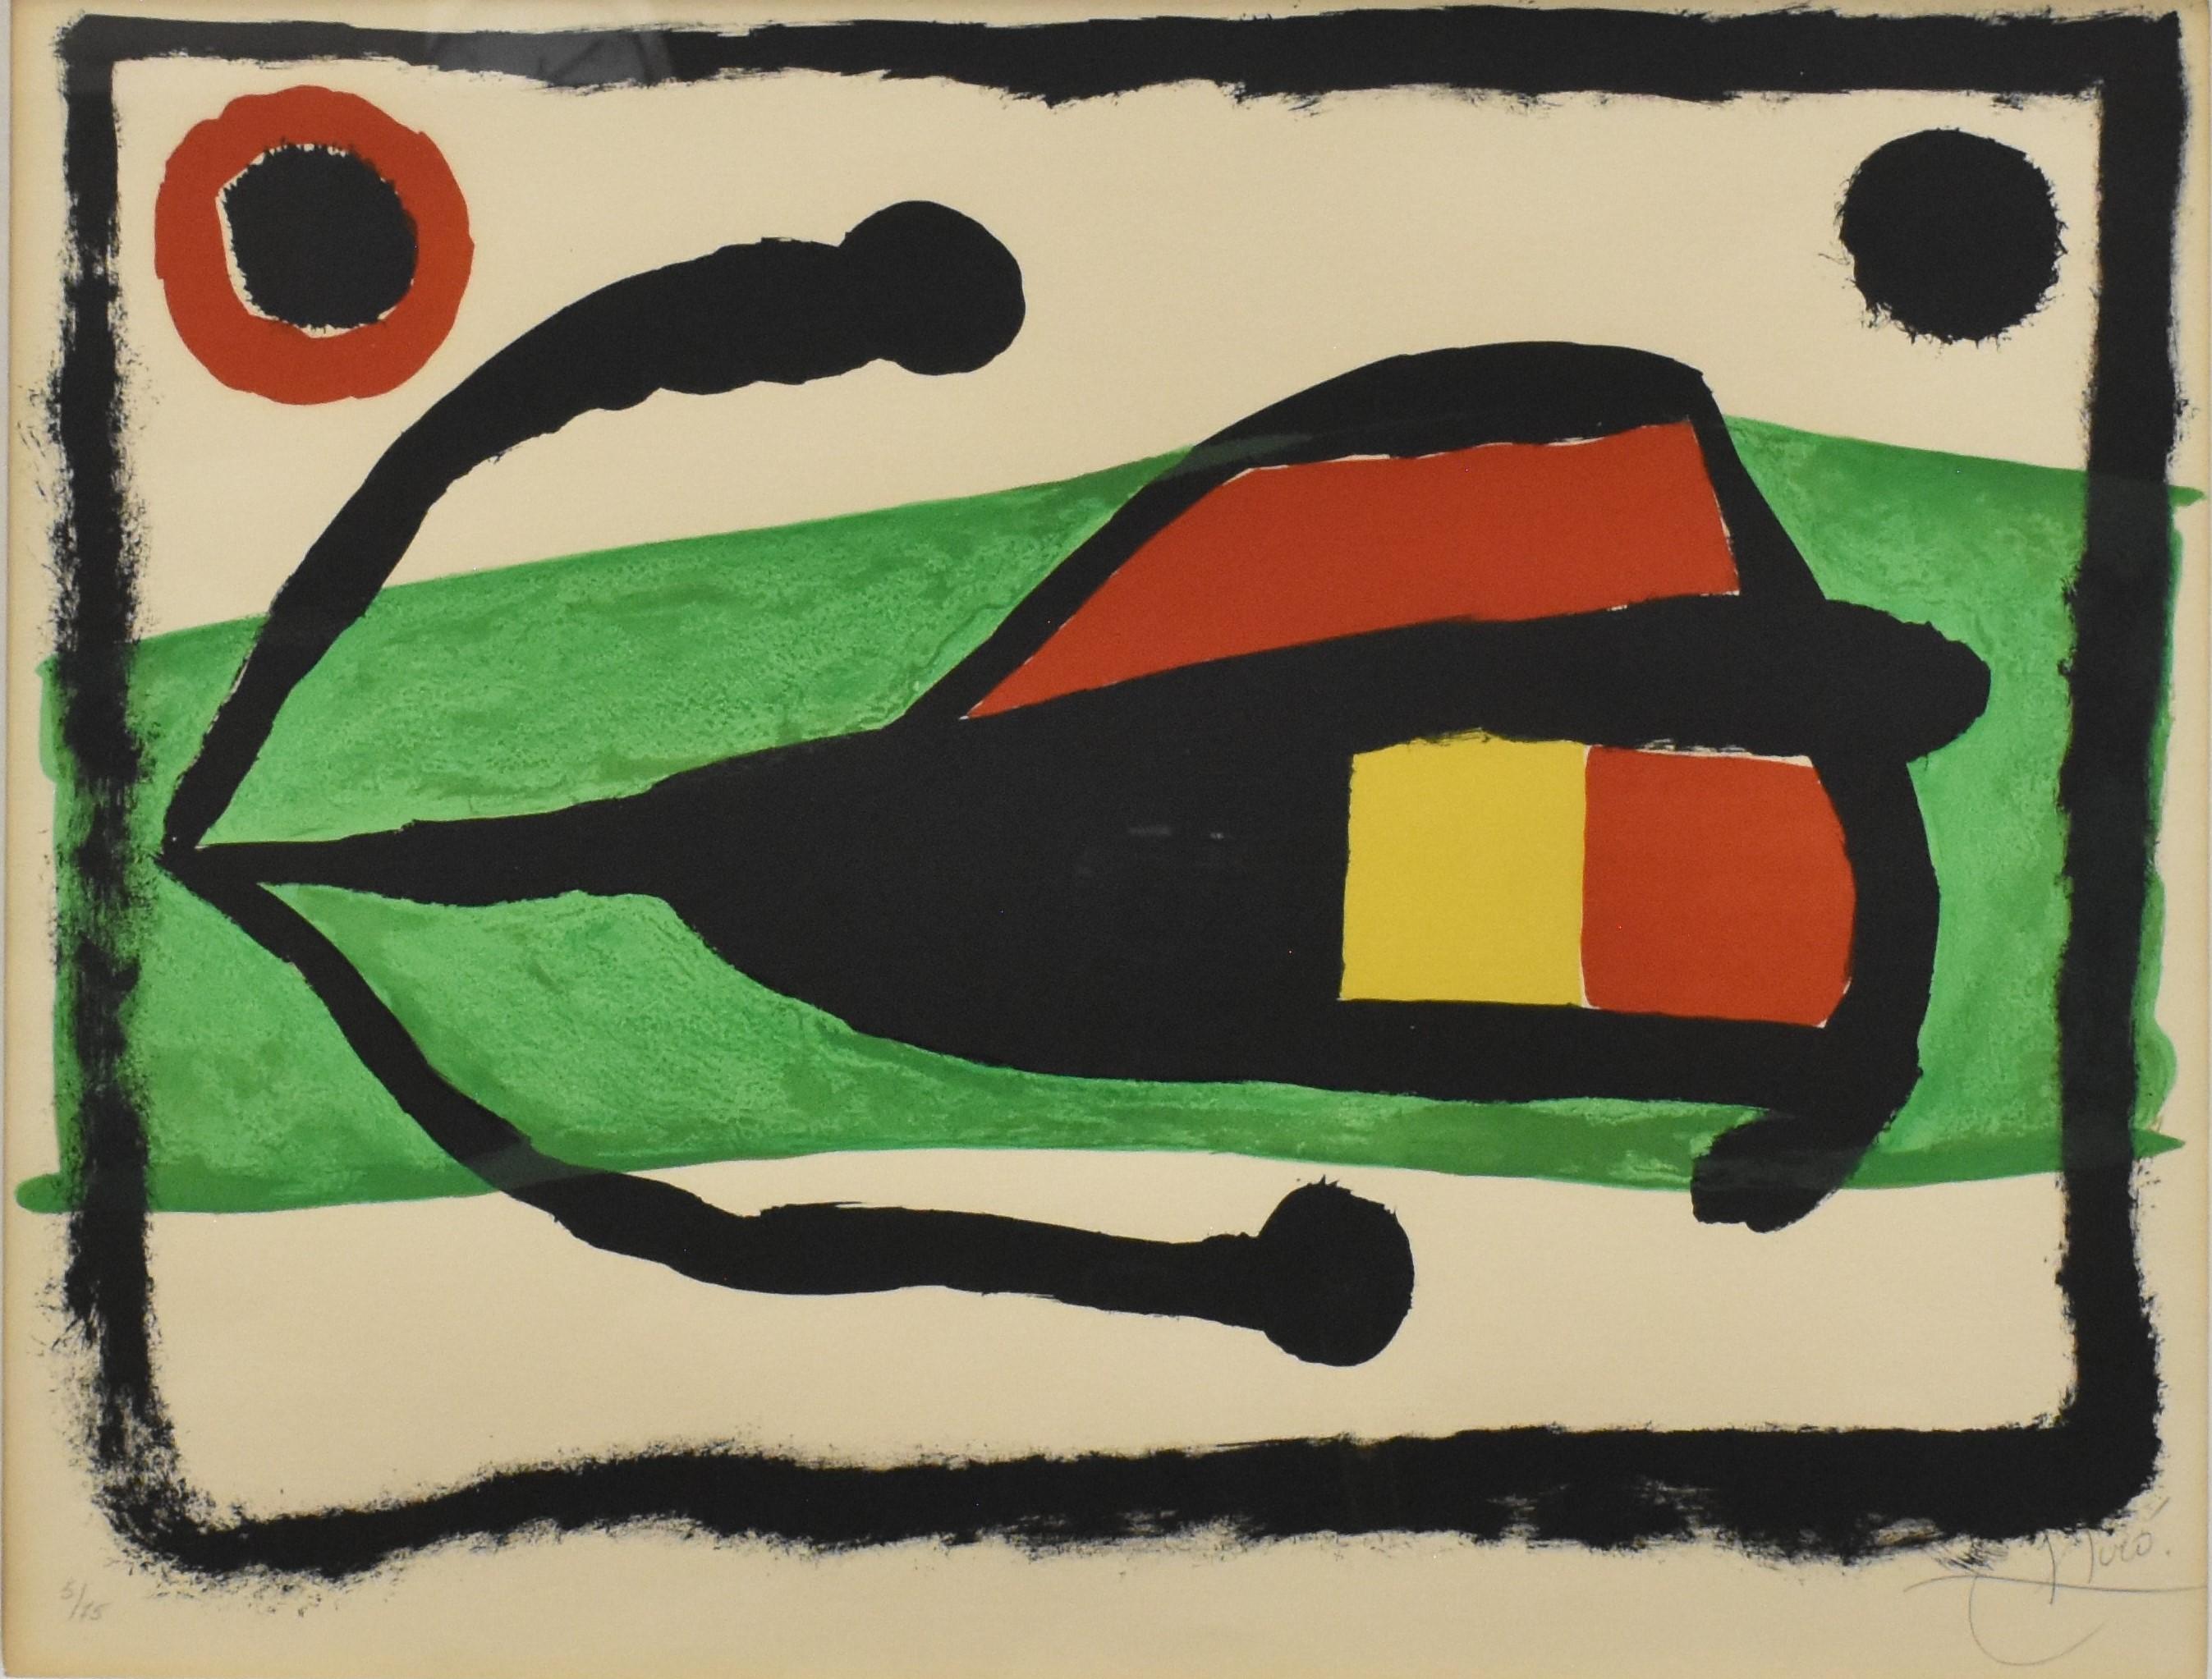 Joan Miro, Altamira, Lithograph in colors, 1958  - Print by Joan Miró